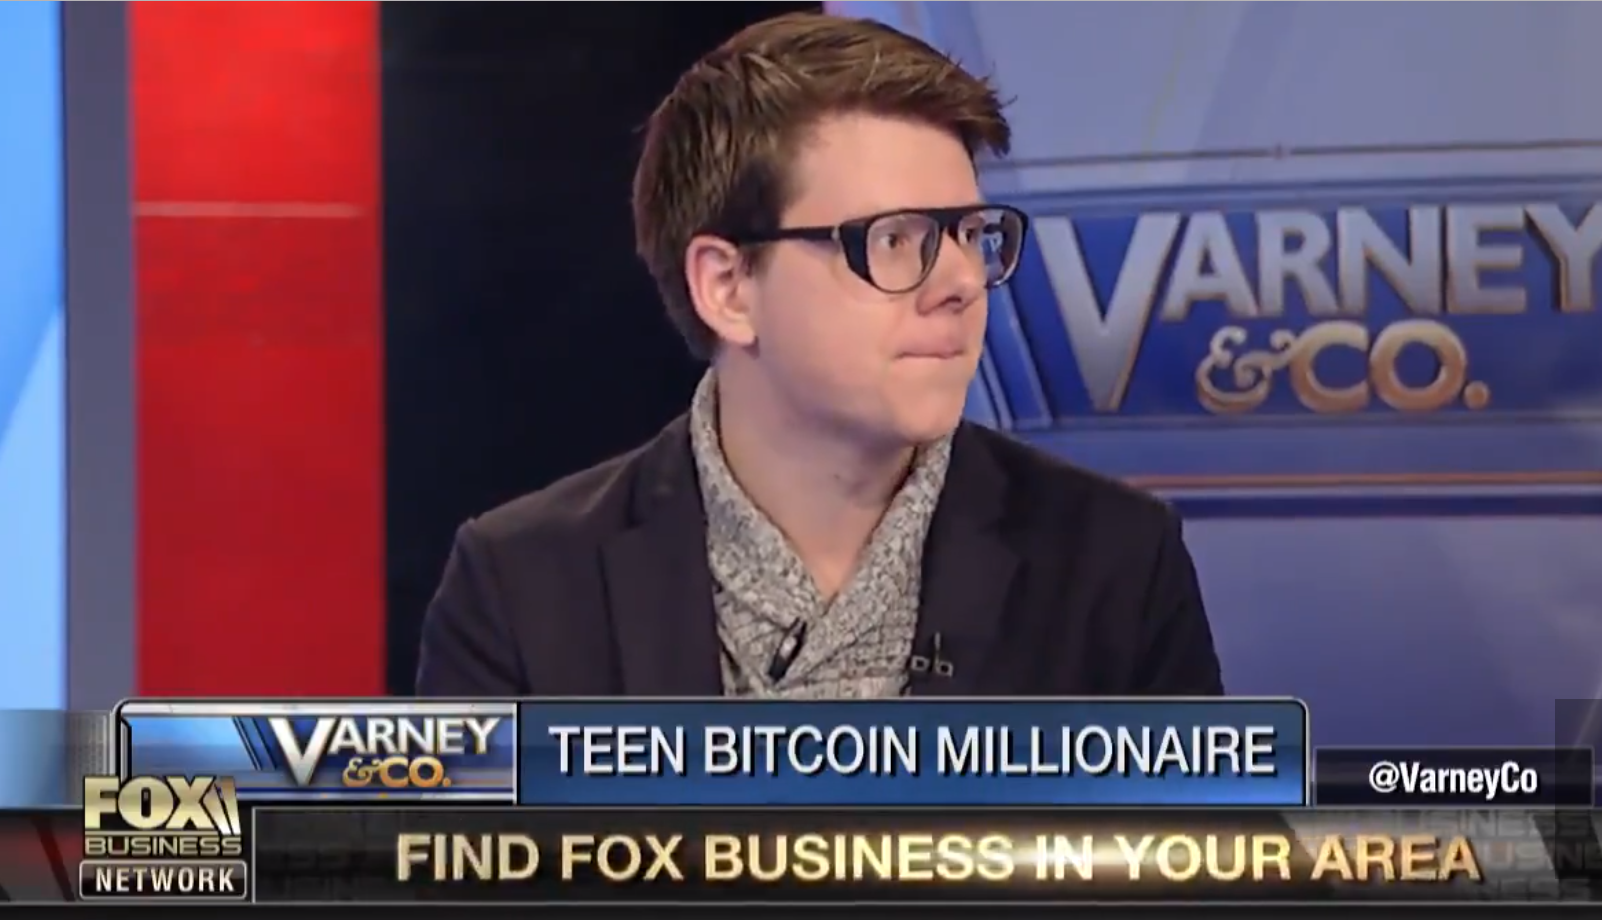 There's No Time Like The Present To Buy Bitcoin Says Teenage Bitcoin Millionaire